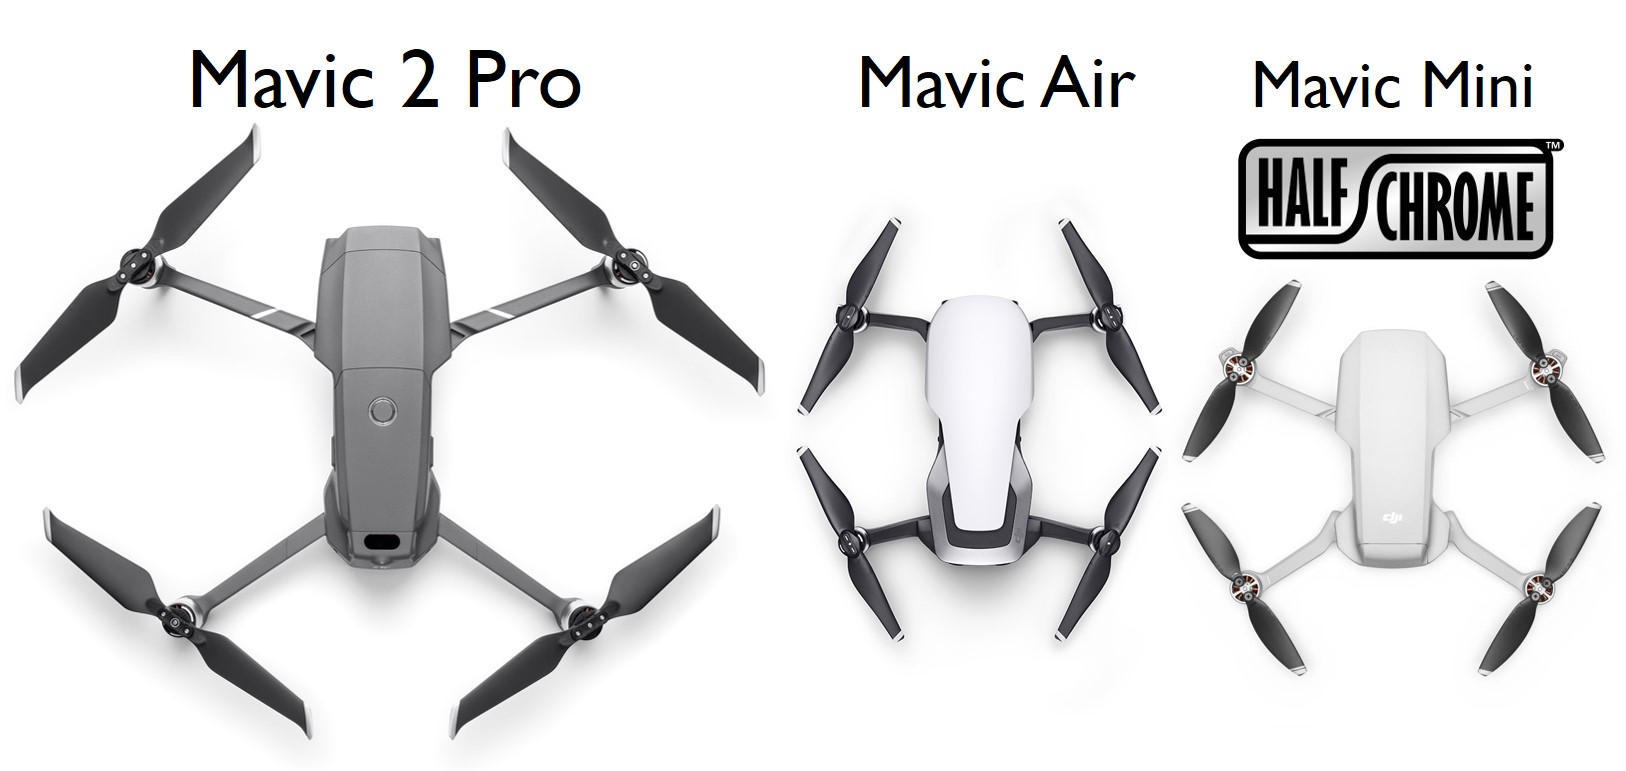 Mavic leaked high-quality and specs, 3 days early! - Half Chrome